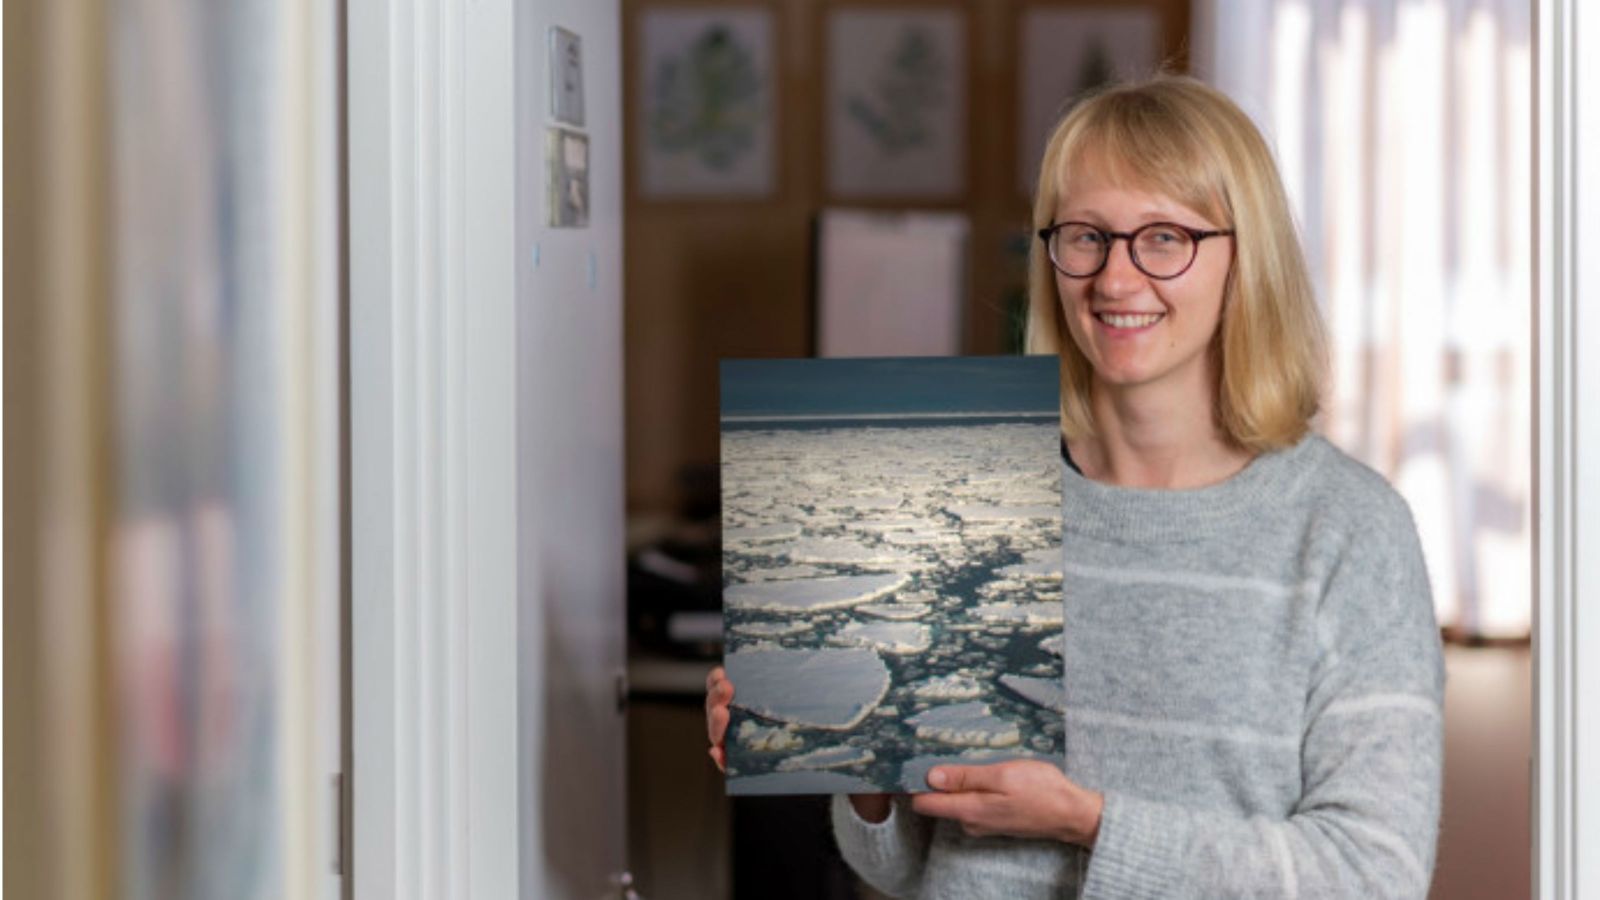 Lettie stands in a hallway holding up an image showing Antarctic ice